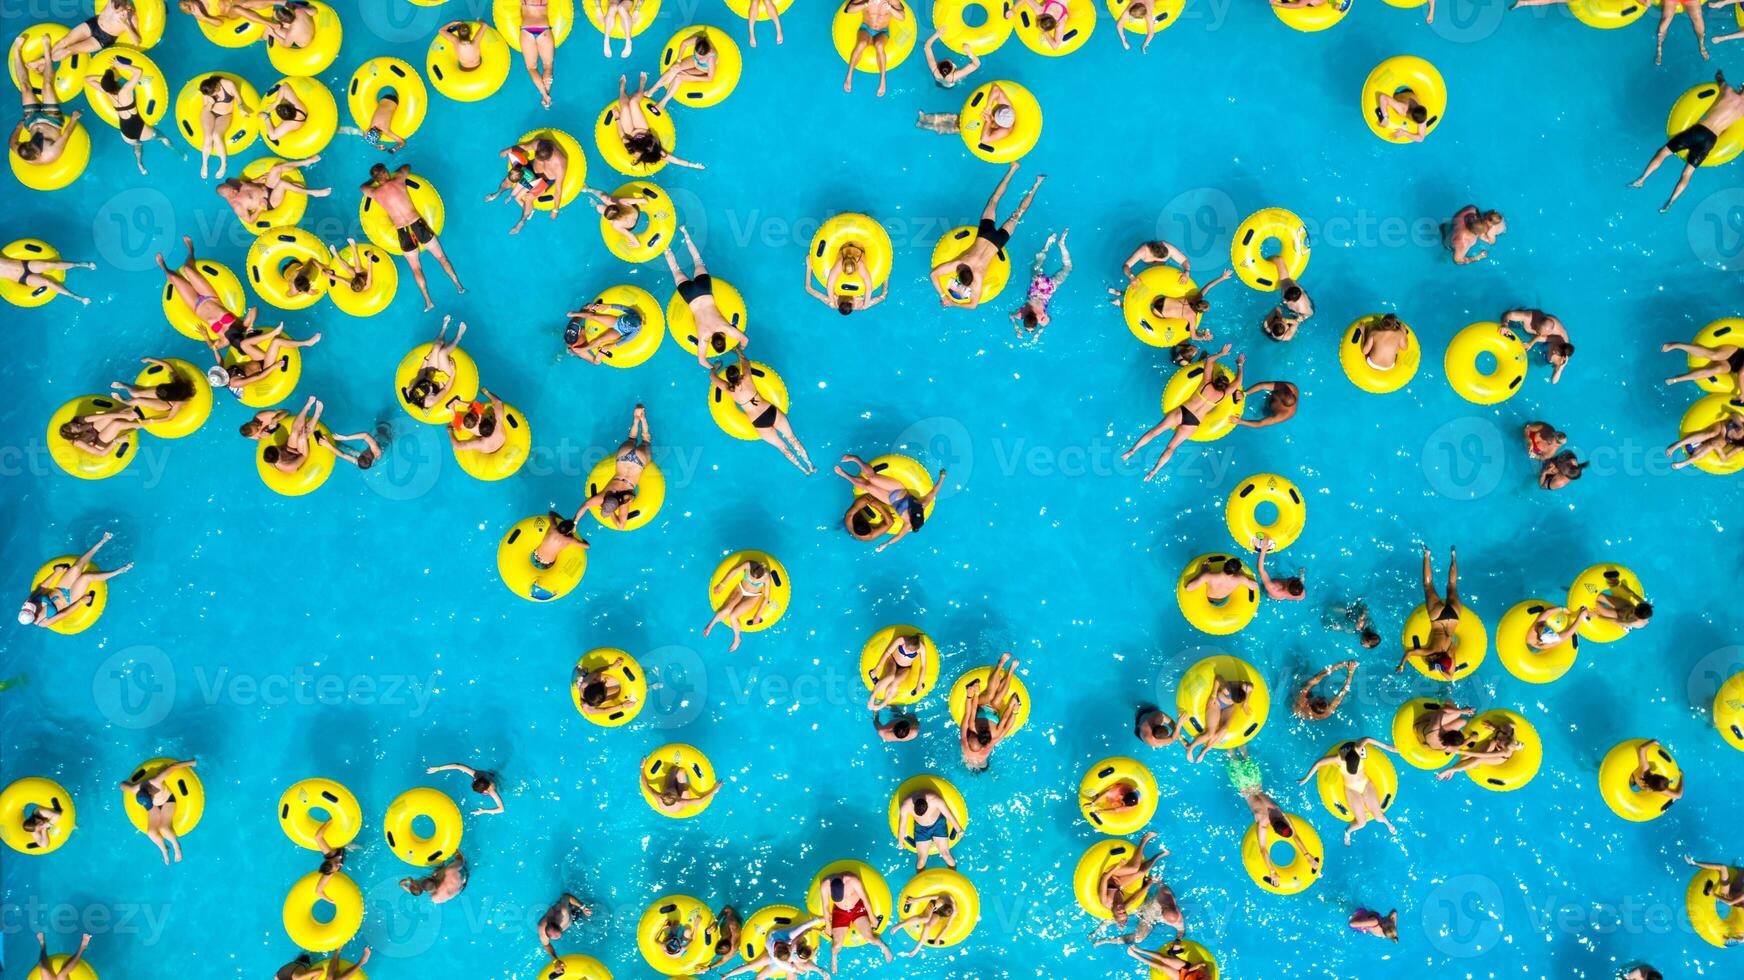 Top view of People relaxing in the pool on yellow inflatable circles photo